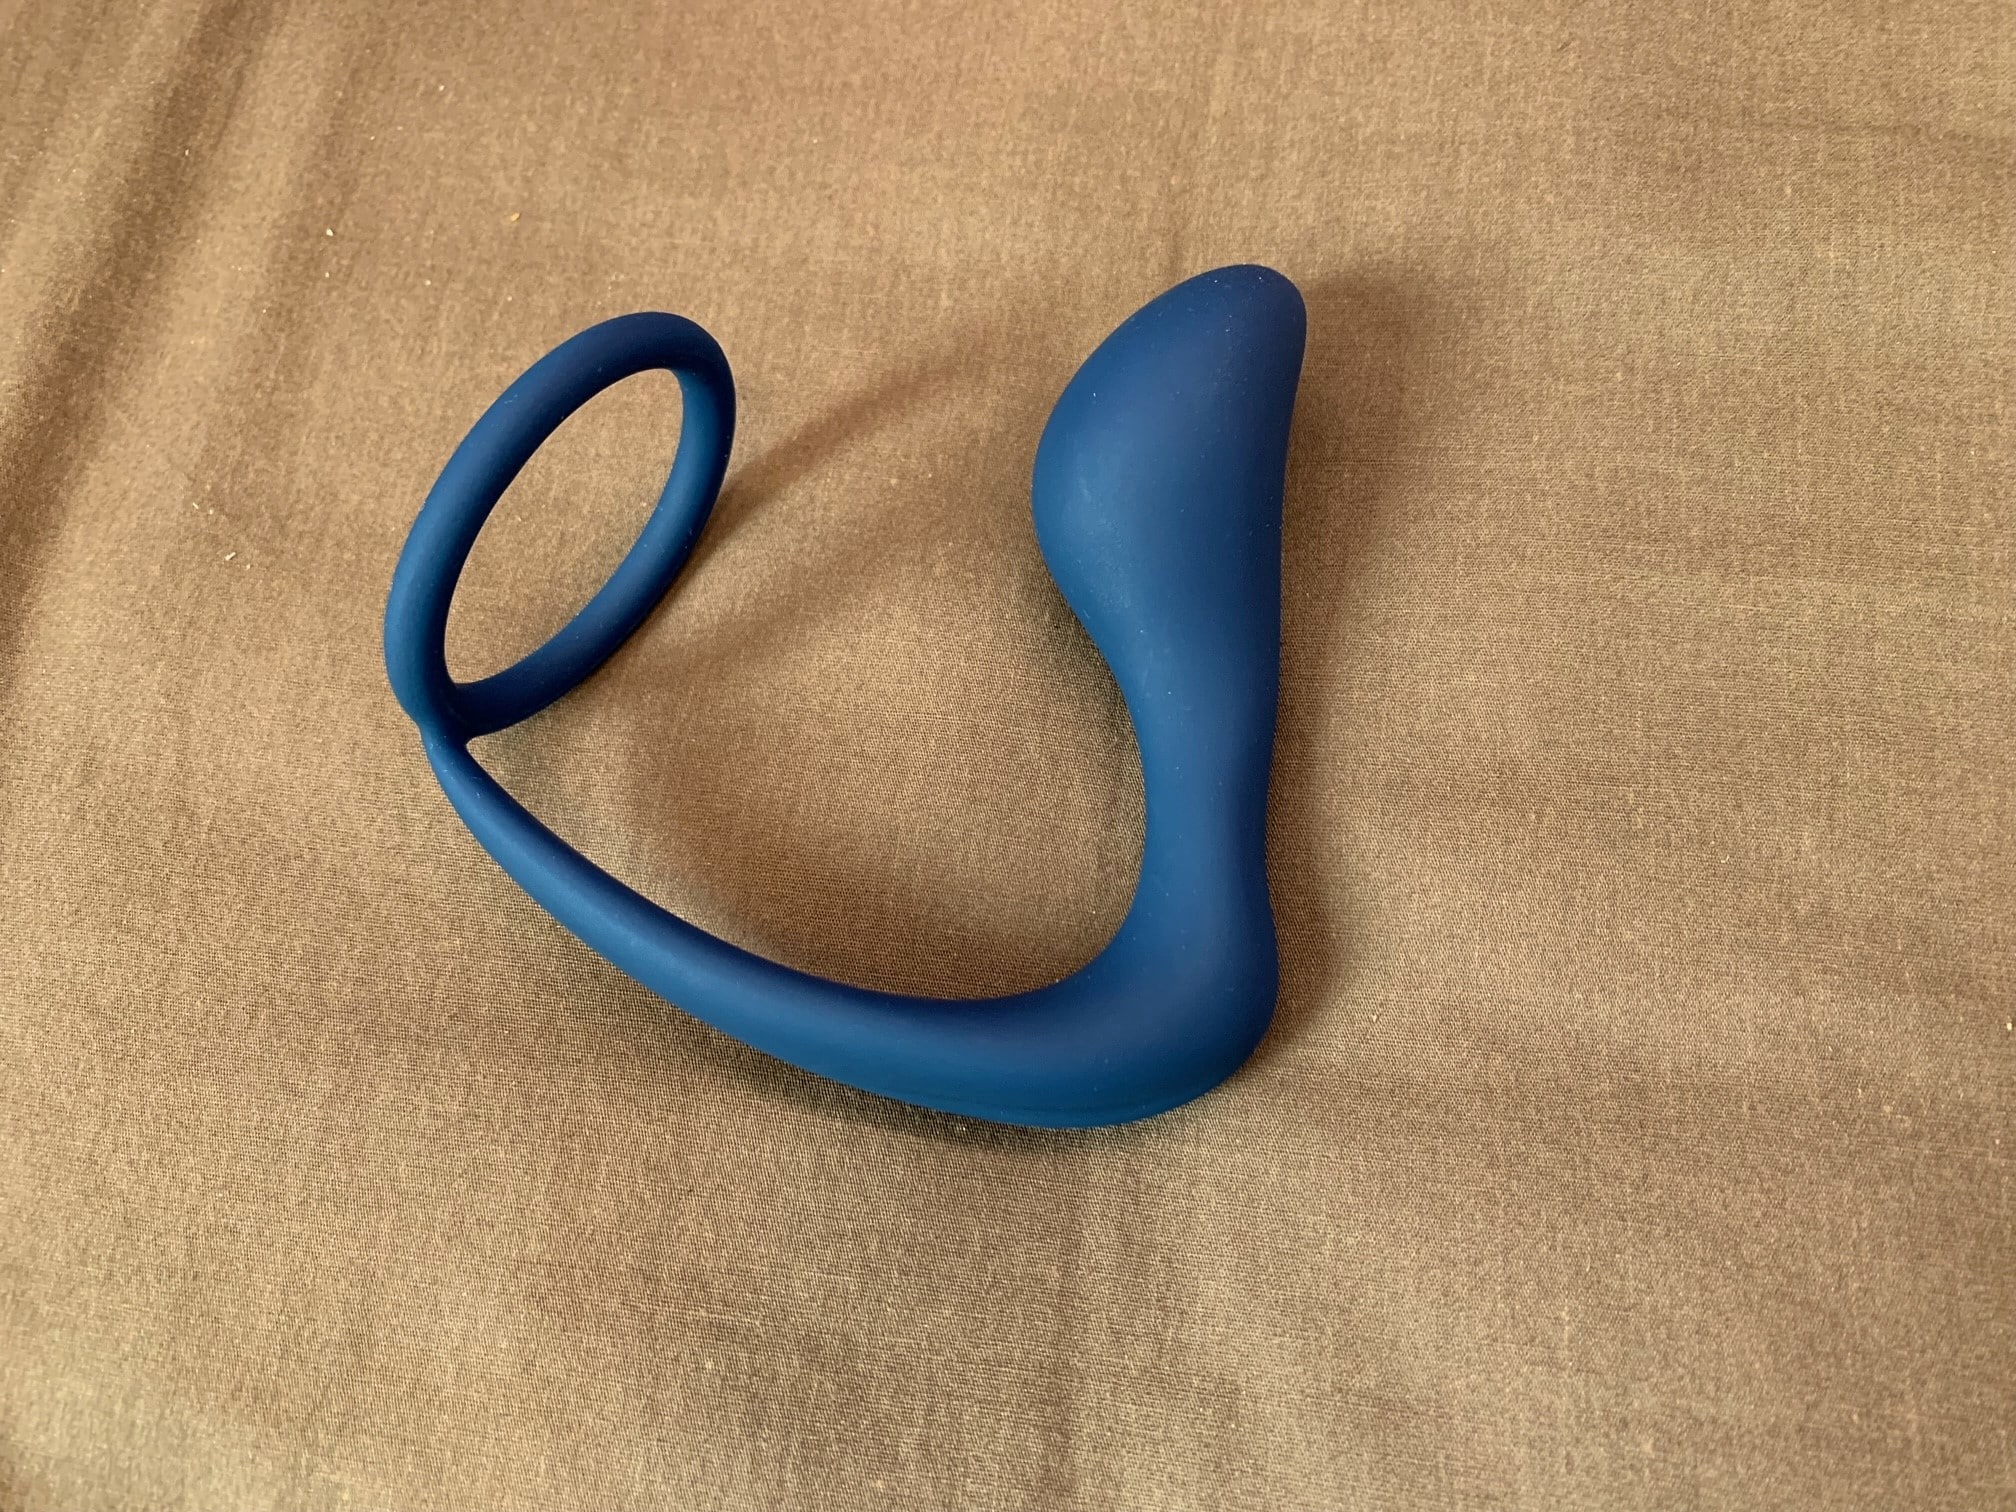 Lynk Plugged Cock Ring Prostate Massager. Slide 2